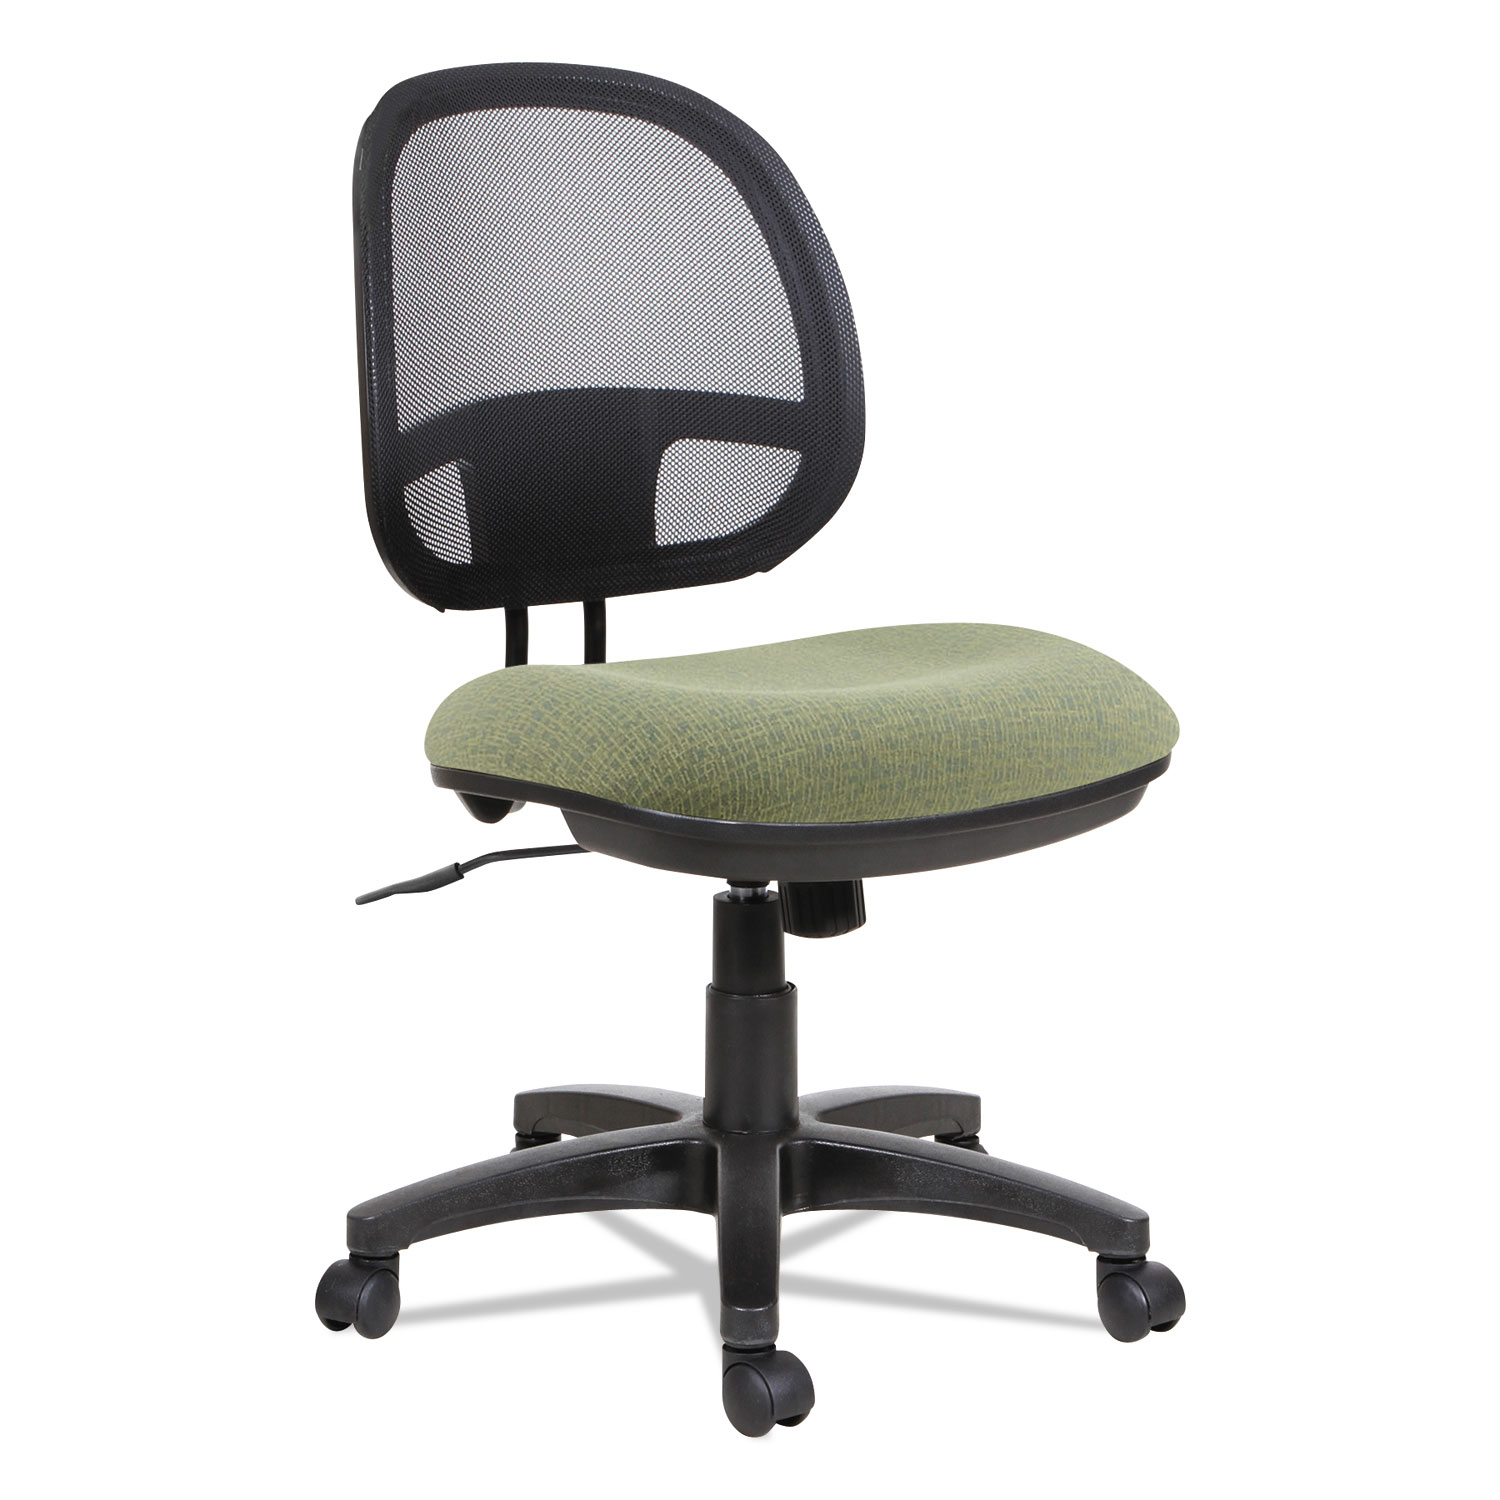 Alera Interval Series Swivel/Tilt Mesh Chair, Supports up to 275 lbs., Parrot Green Seat/Parrot Green Back, Black Base